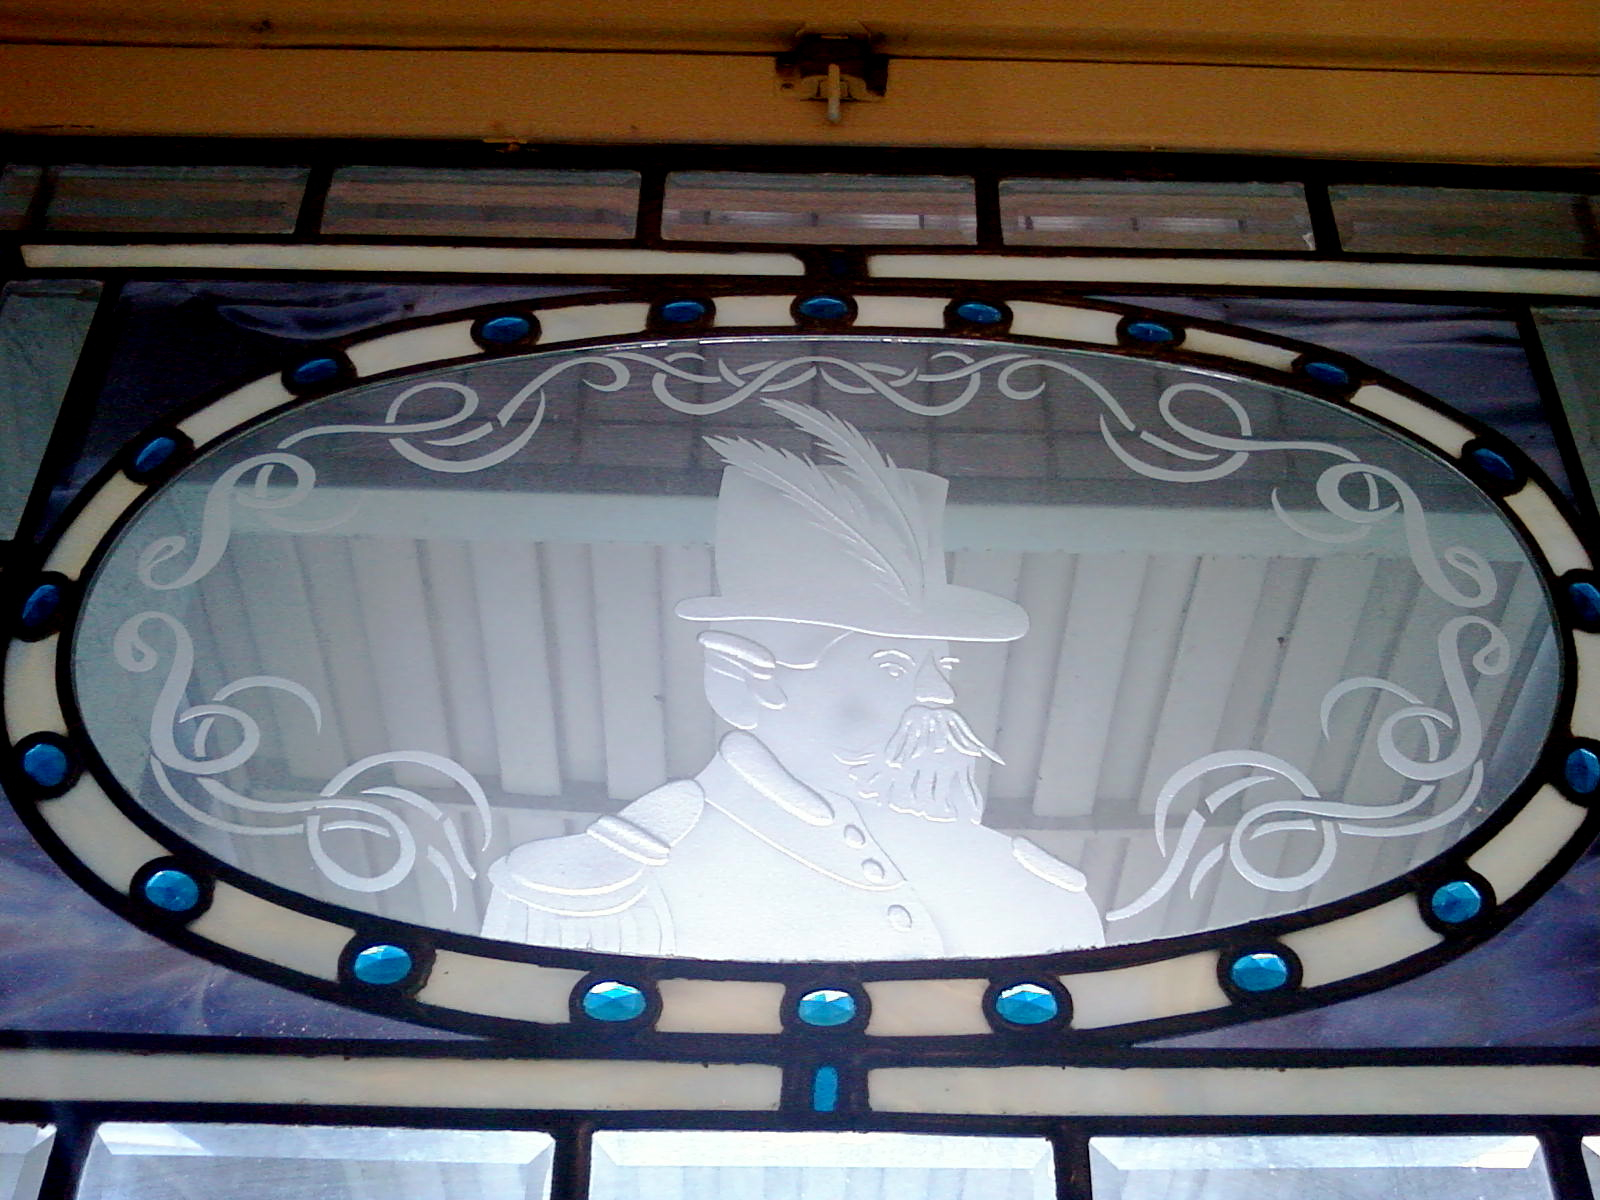   Glass etching in entry transom at the Emperor Norton Inn, 615 Post Street, San Francisco. &nbsp;Creator and date unknown. Photograph ©&nbsp;2010  D. Huw Richardson . [Added 6.28.2016] 